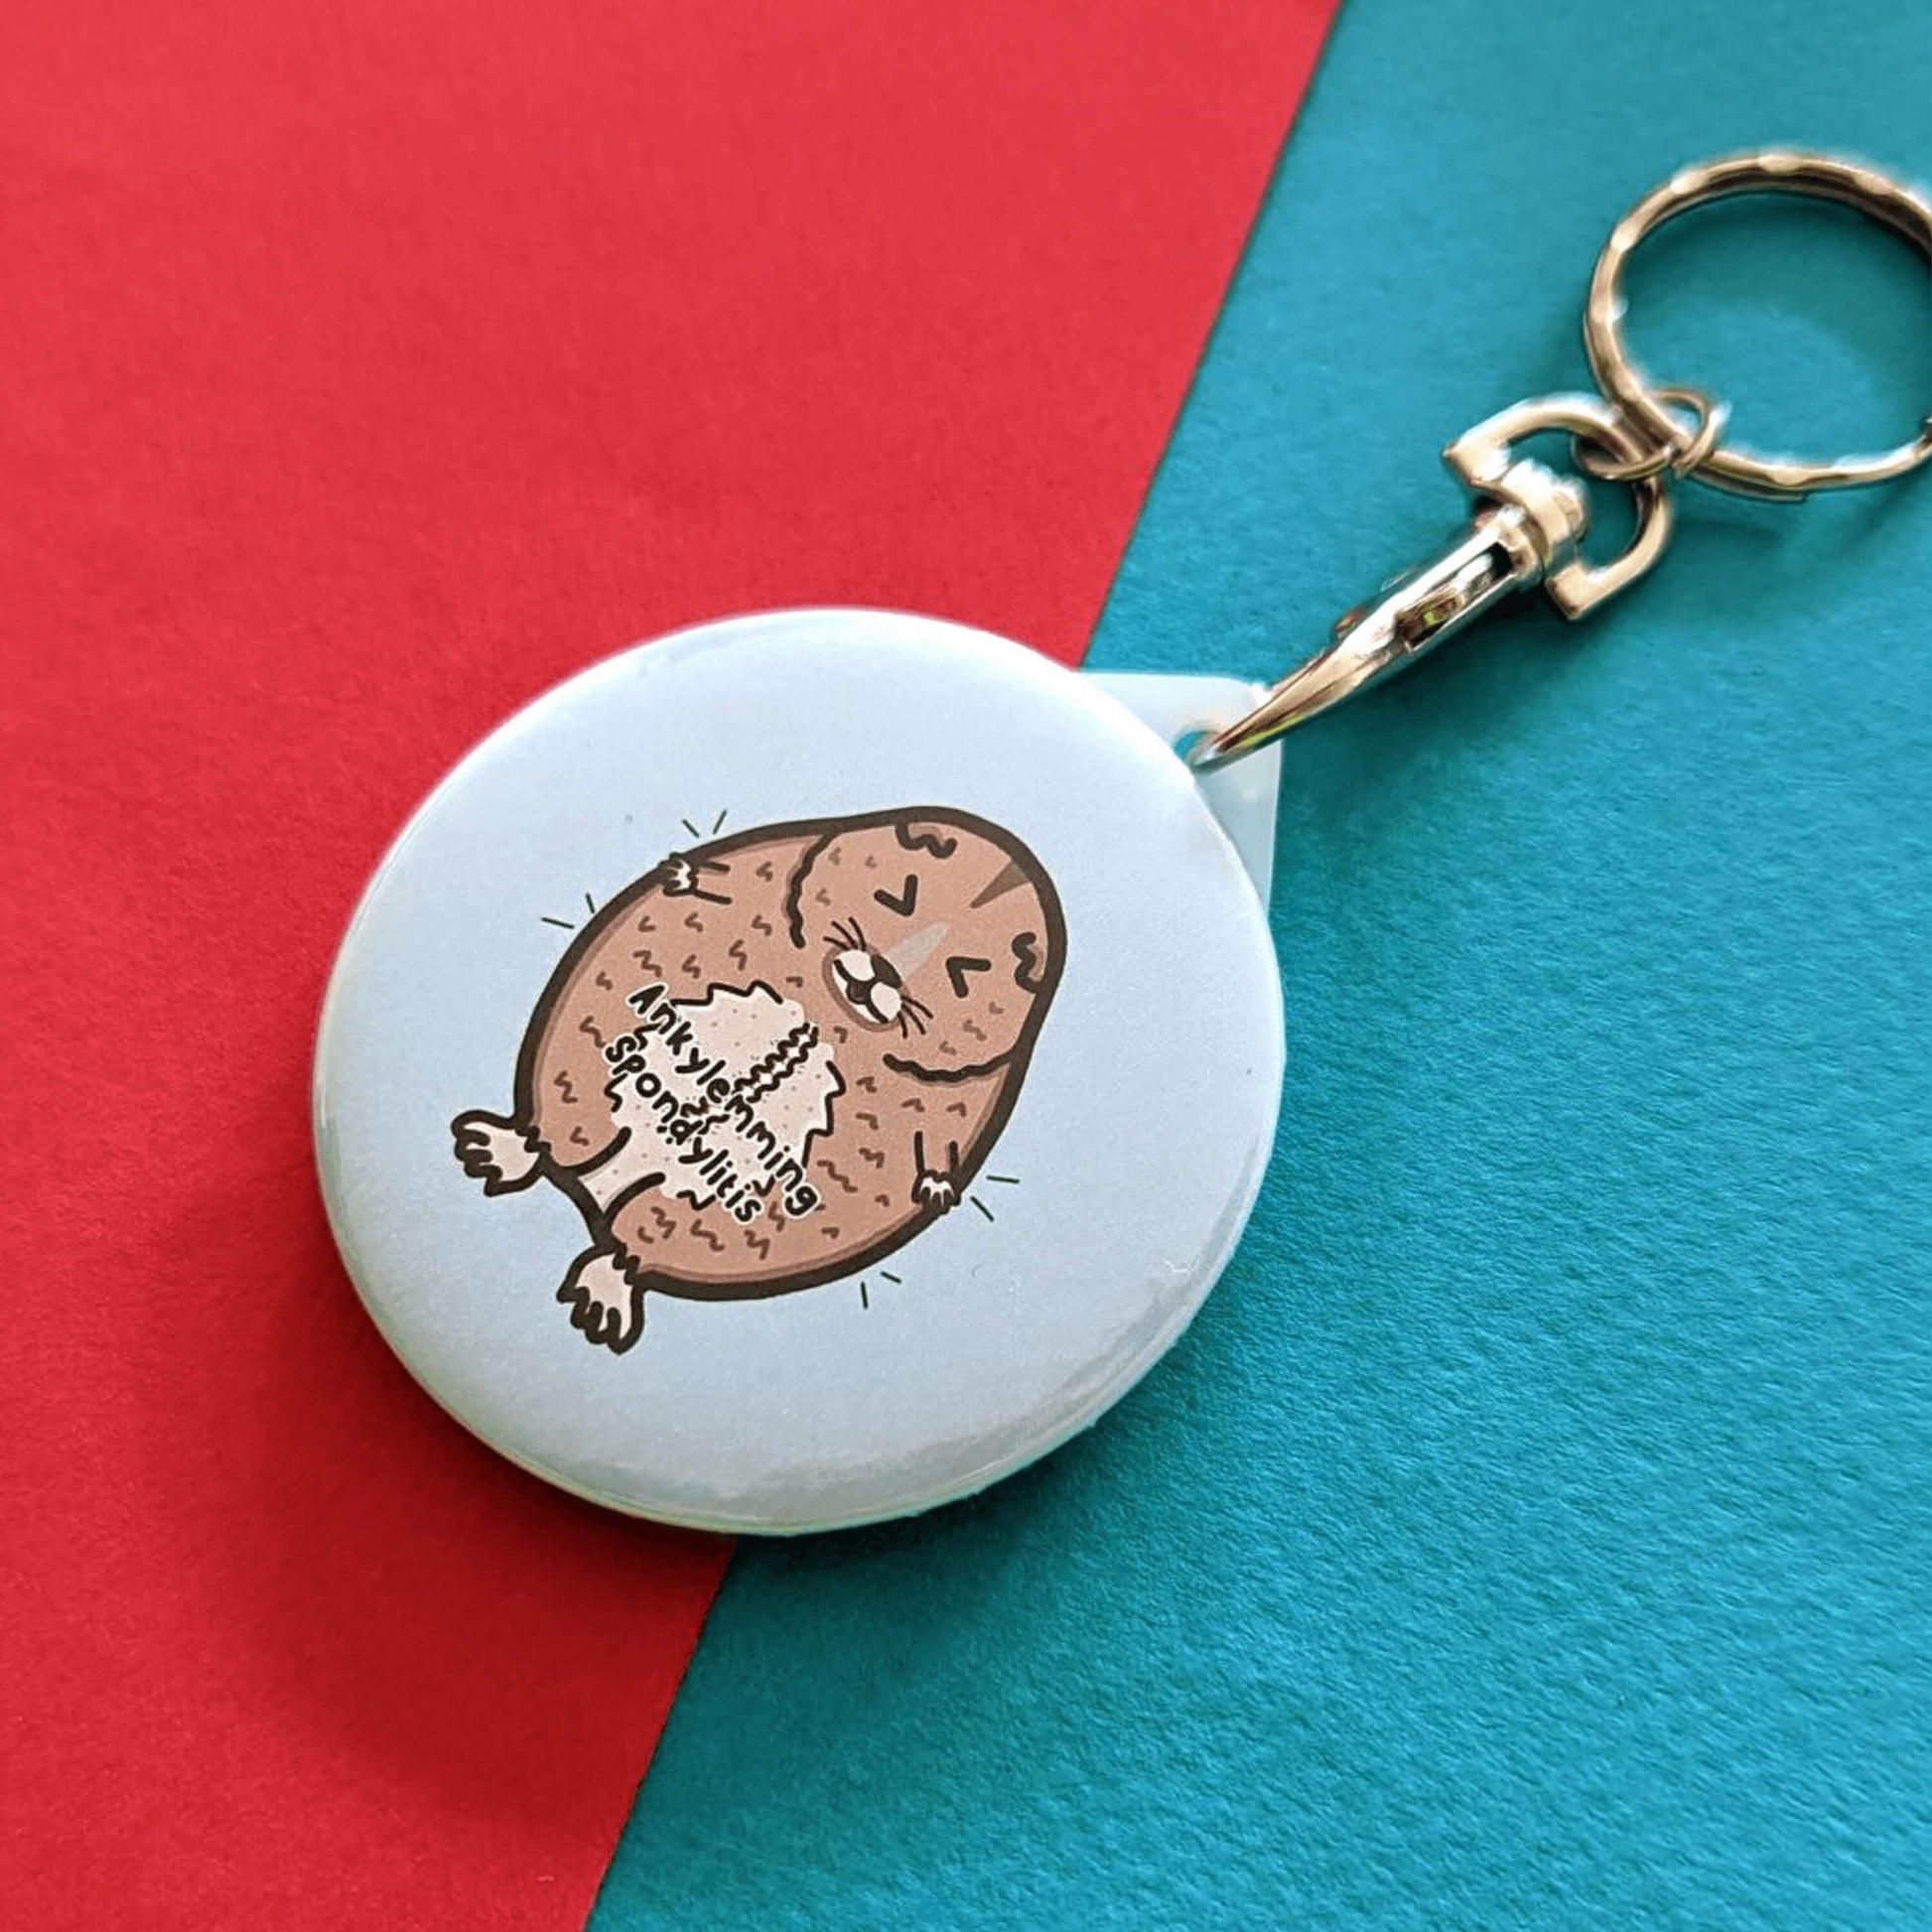 The Ankylemming - Ankylosing Spondylitis Keyring, a stressed lemming with its eyes scrunched shut on a white background circle keychain with the text ankylemming spondylitis being held up by a silver lobster clip on a blue and red background. Raising awareness for Ankylosing Spondylitis.